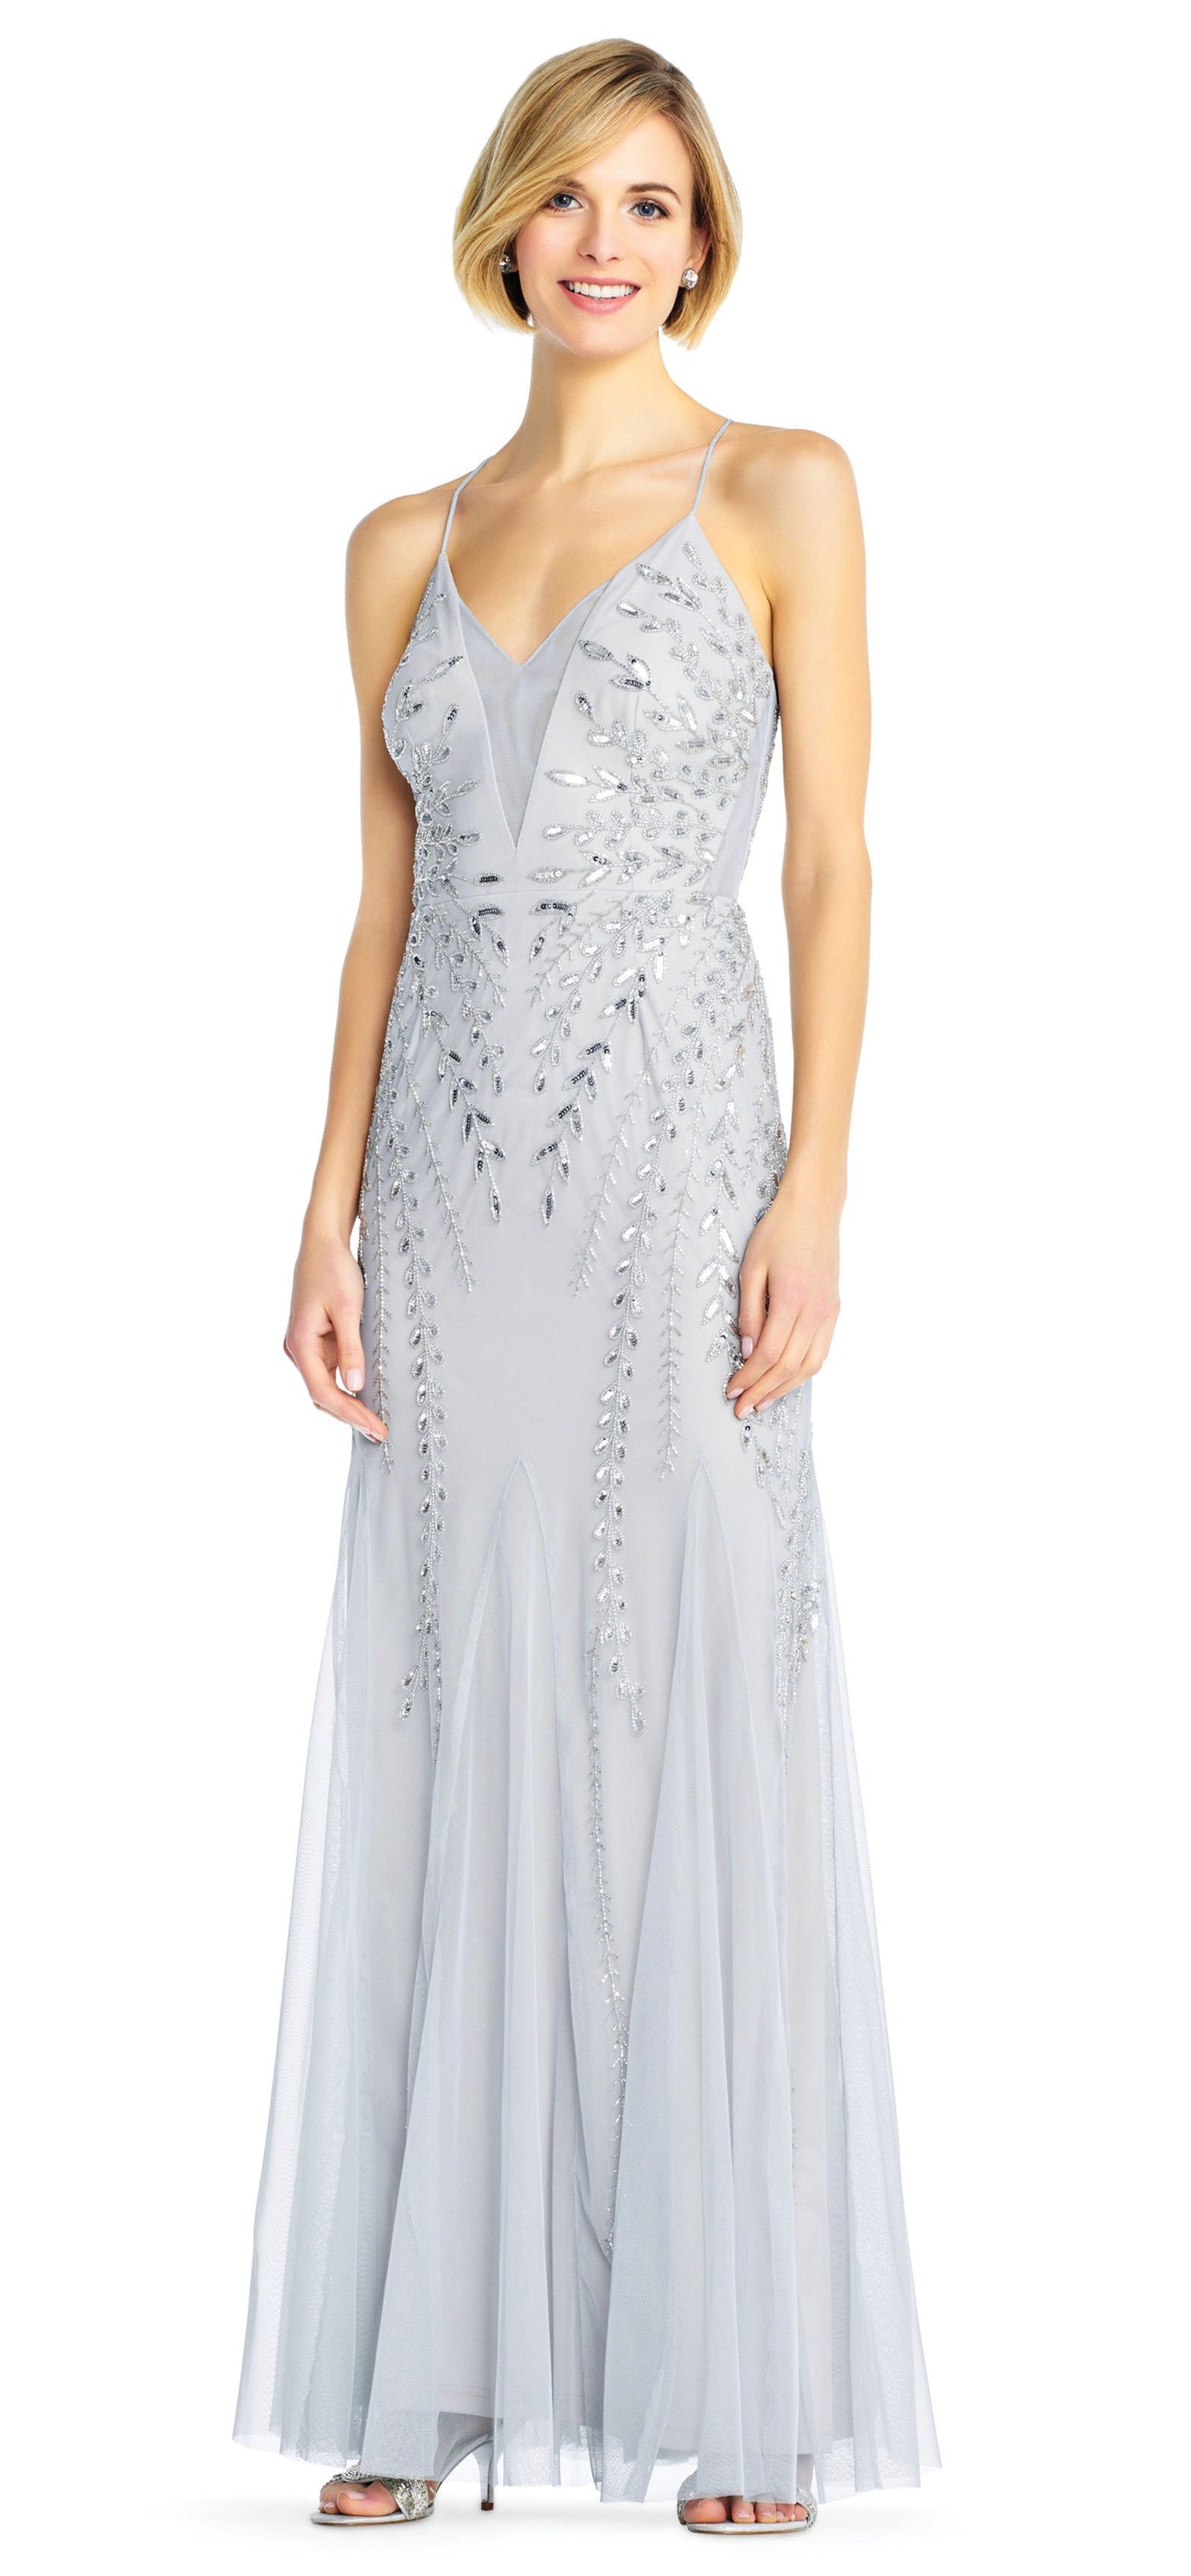 Adrianna Papell - AP1E202873 Rhinestone Embellished V-Neck Gown In Blue and Silver